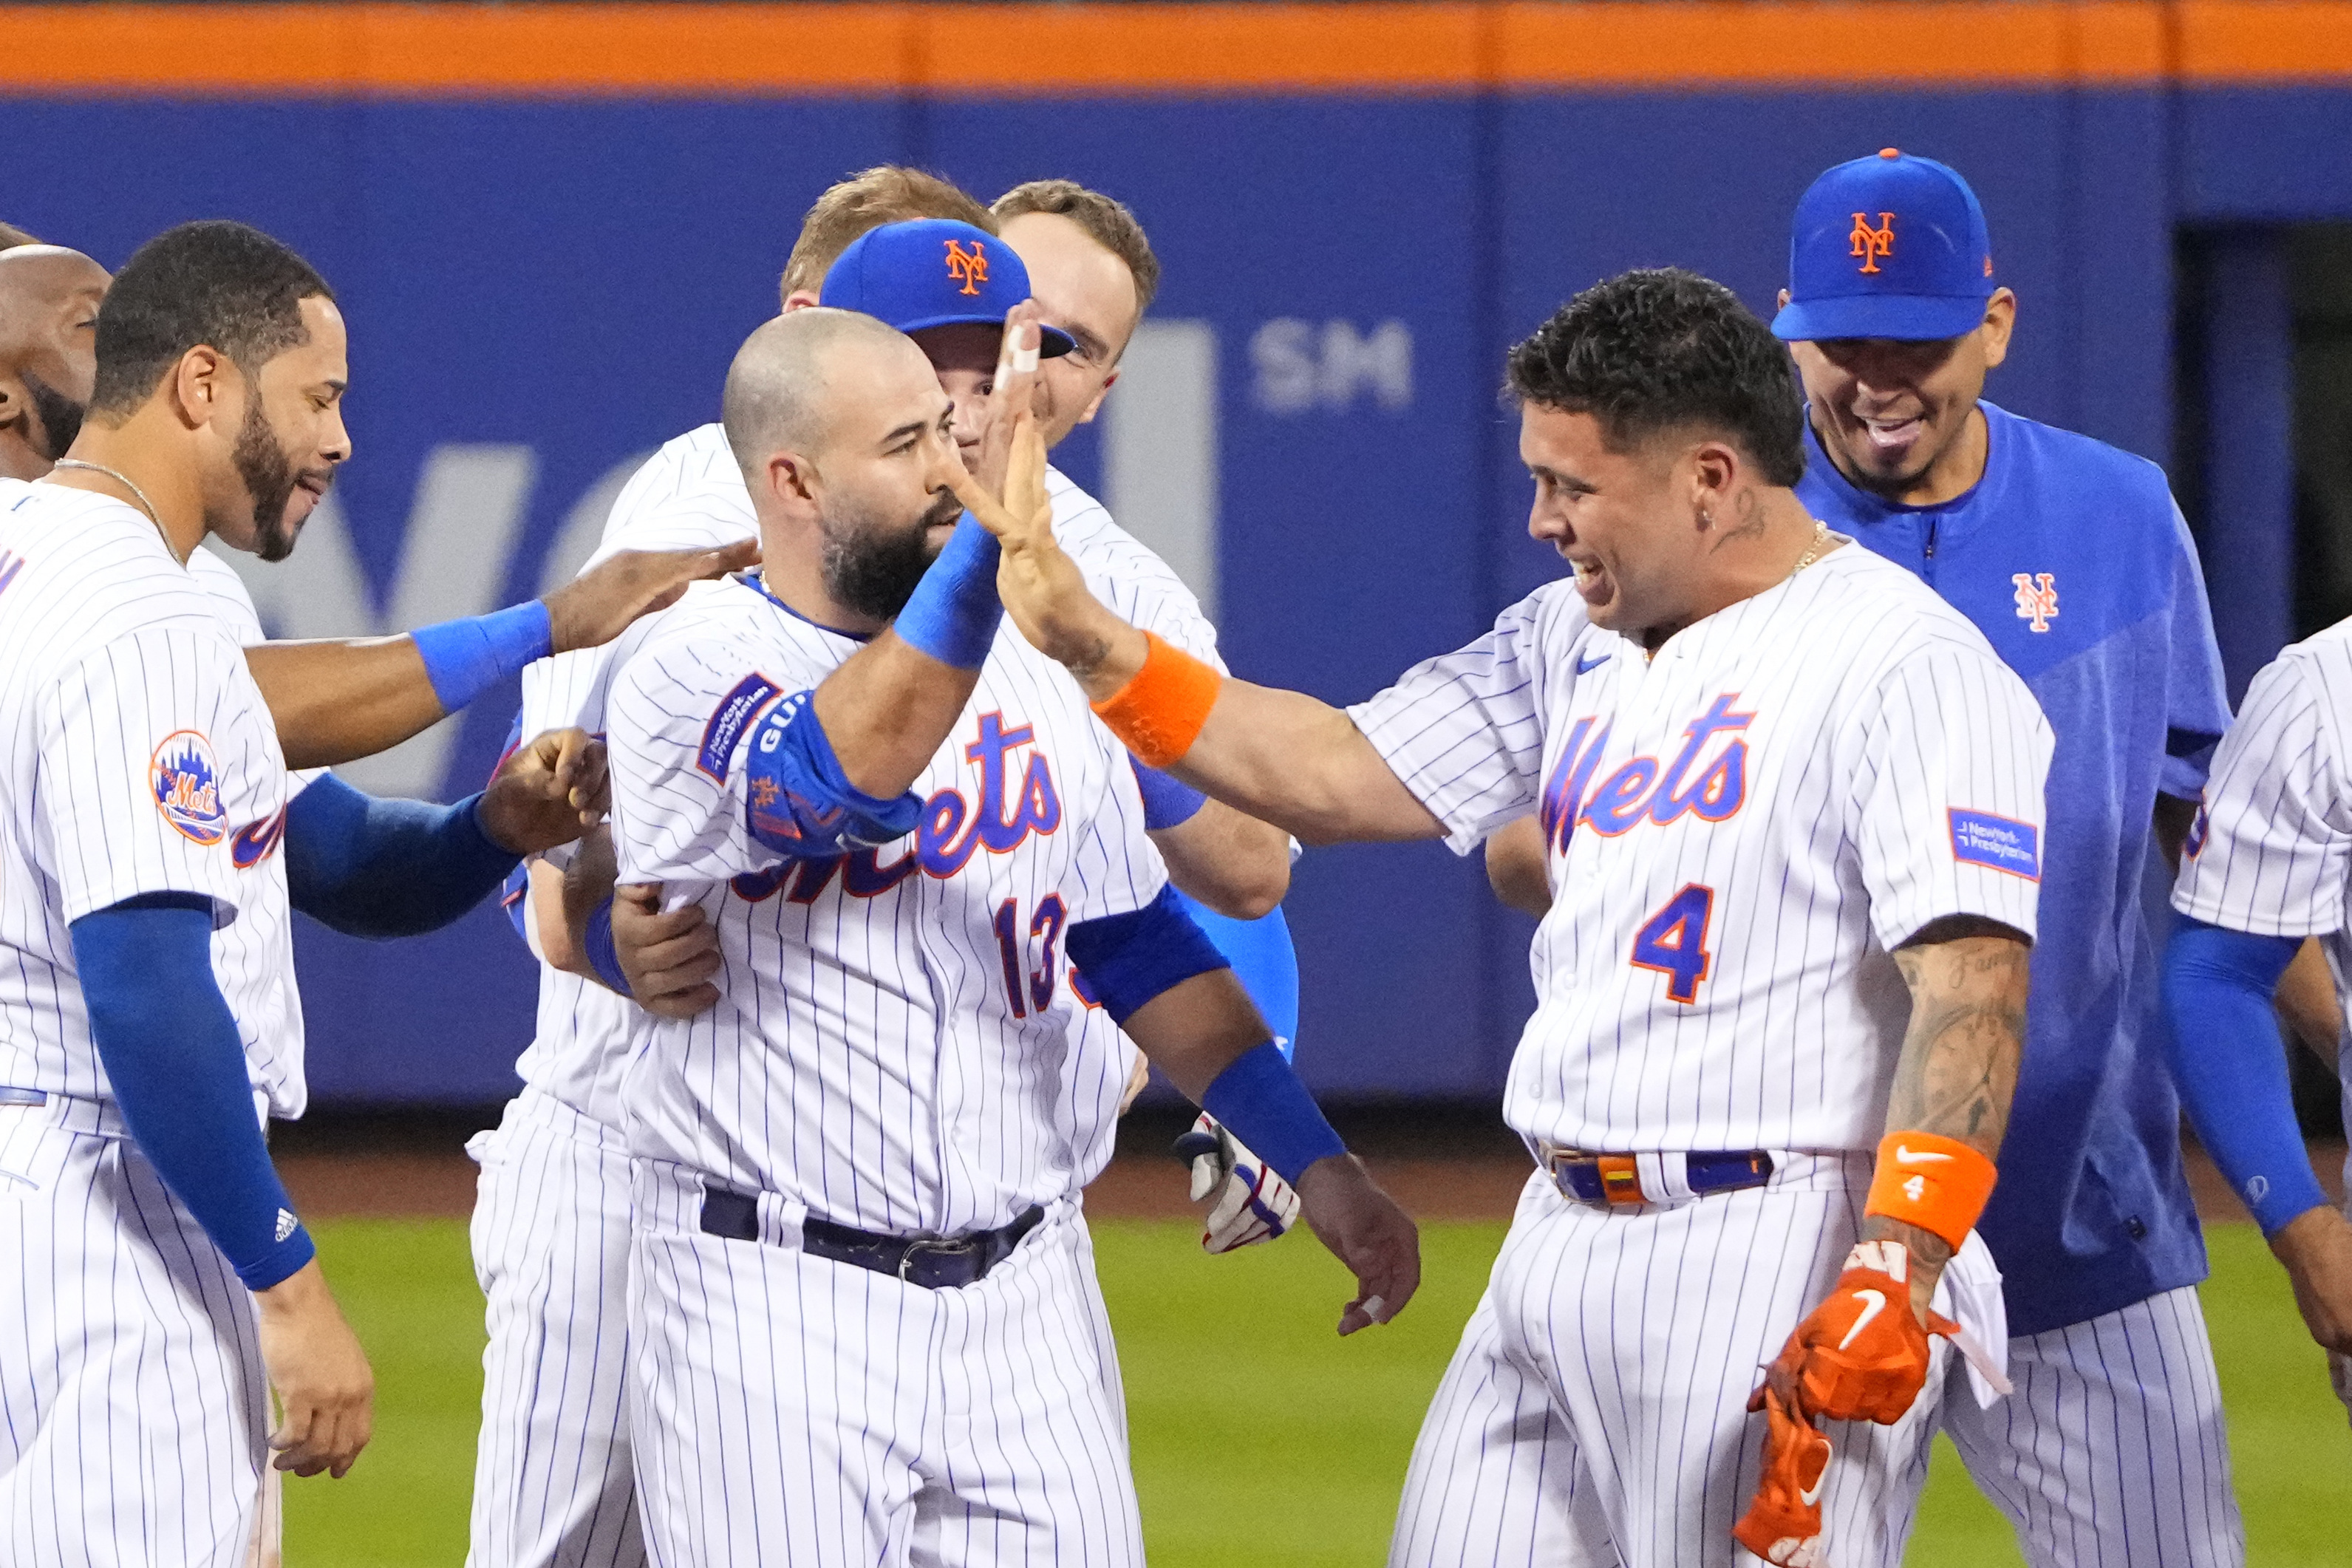 Luis Guillorme's walk-off double gets Mets past Dodgers in 10